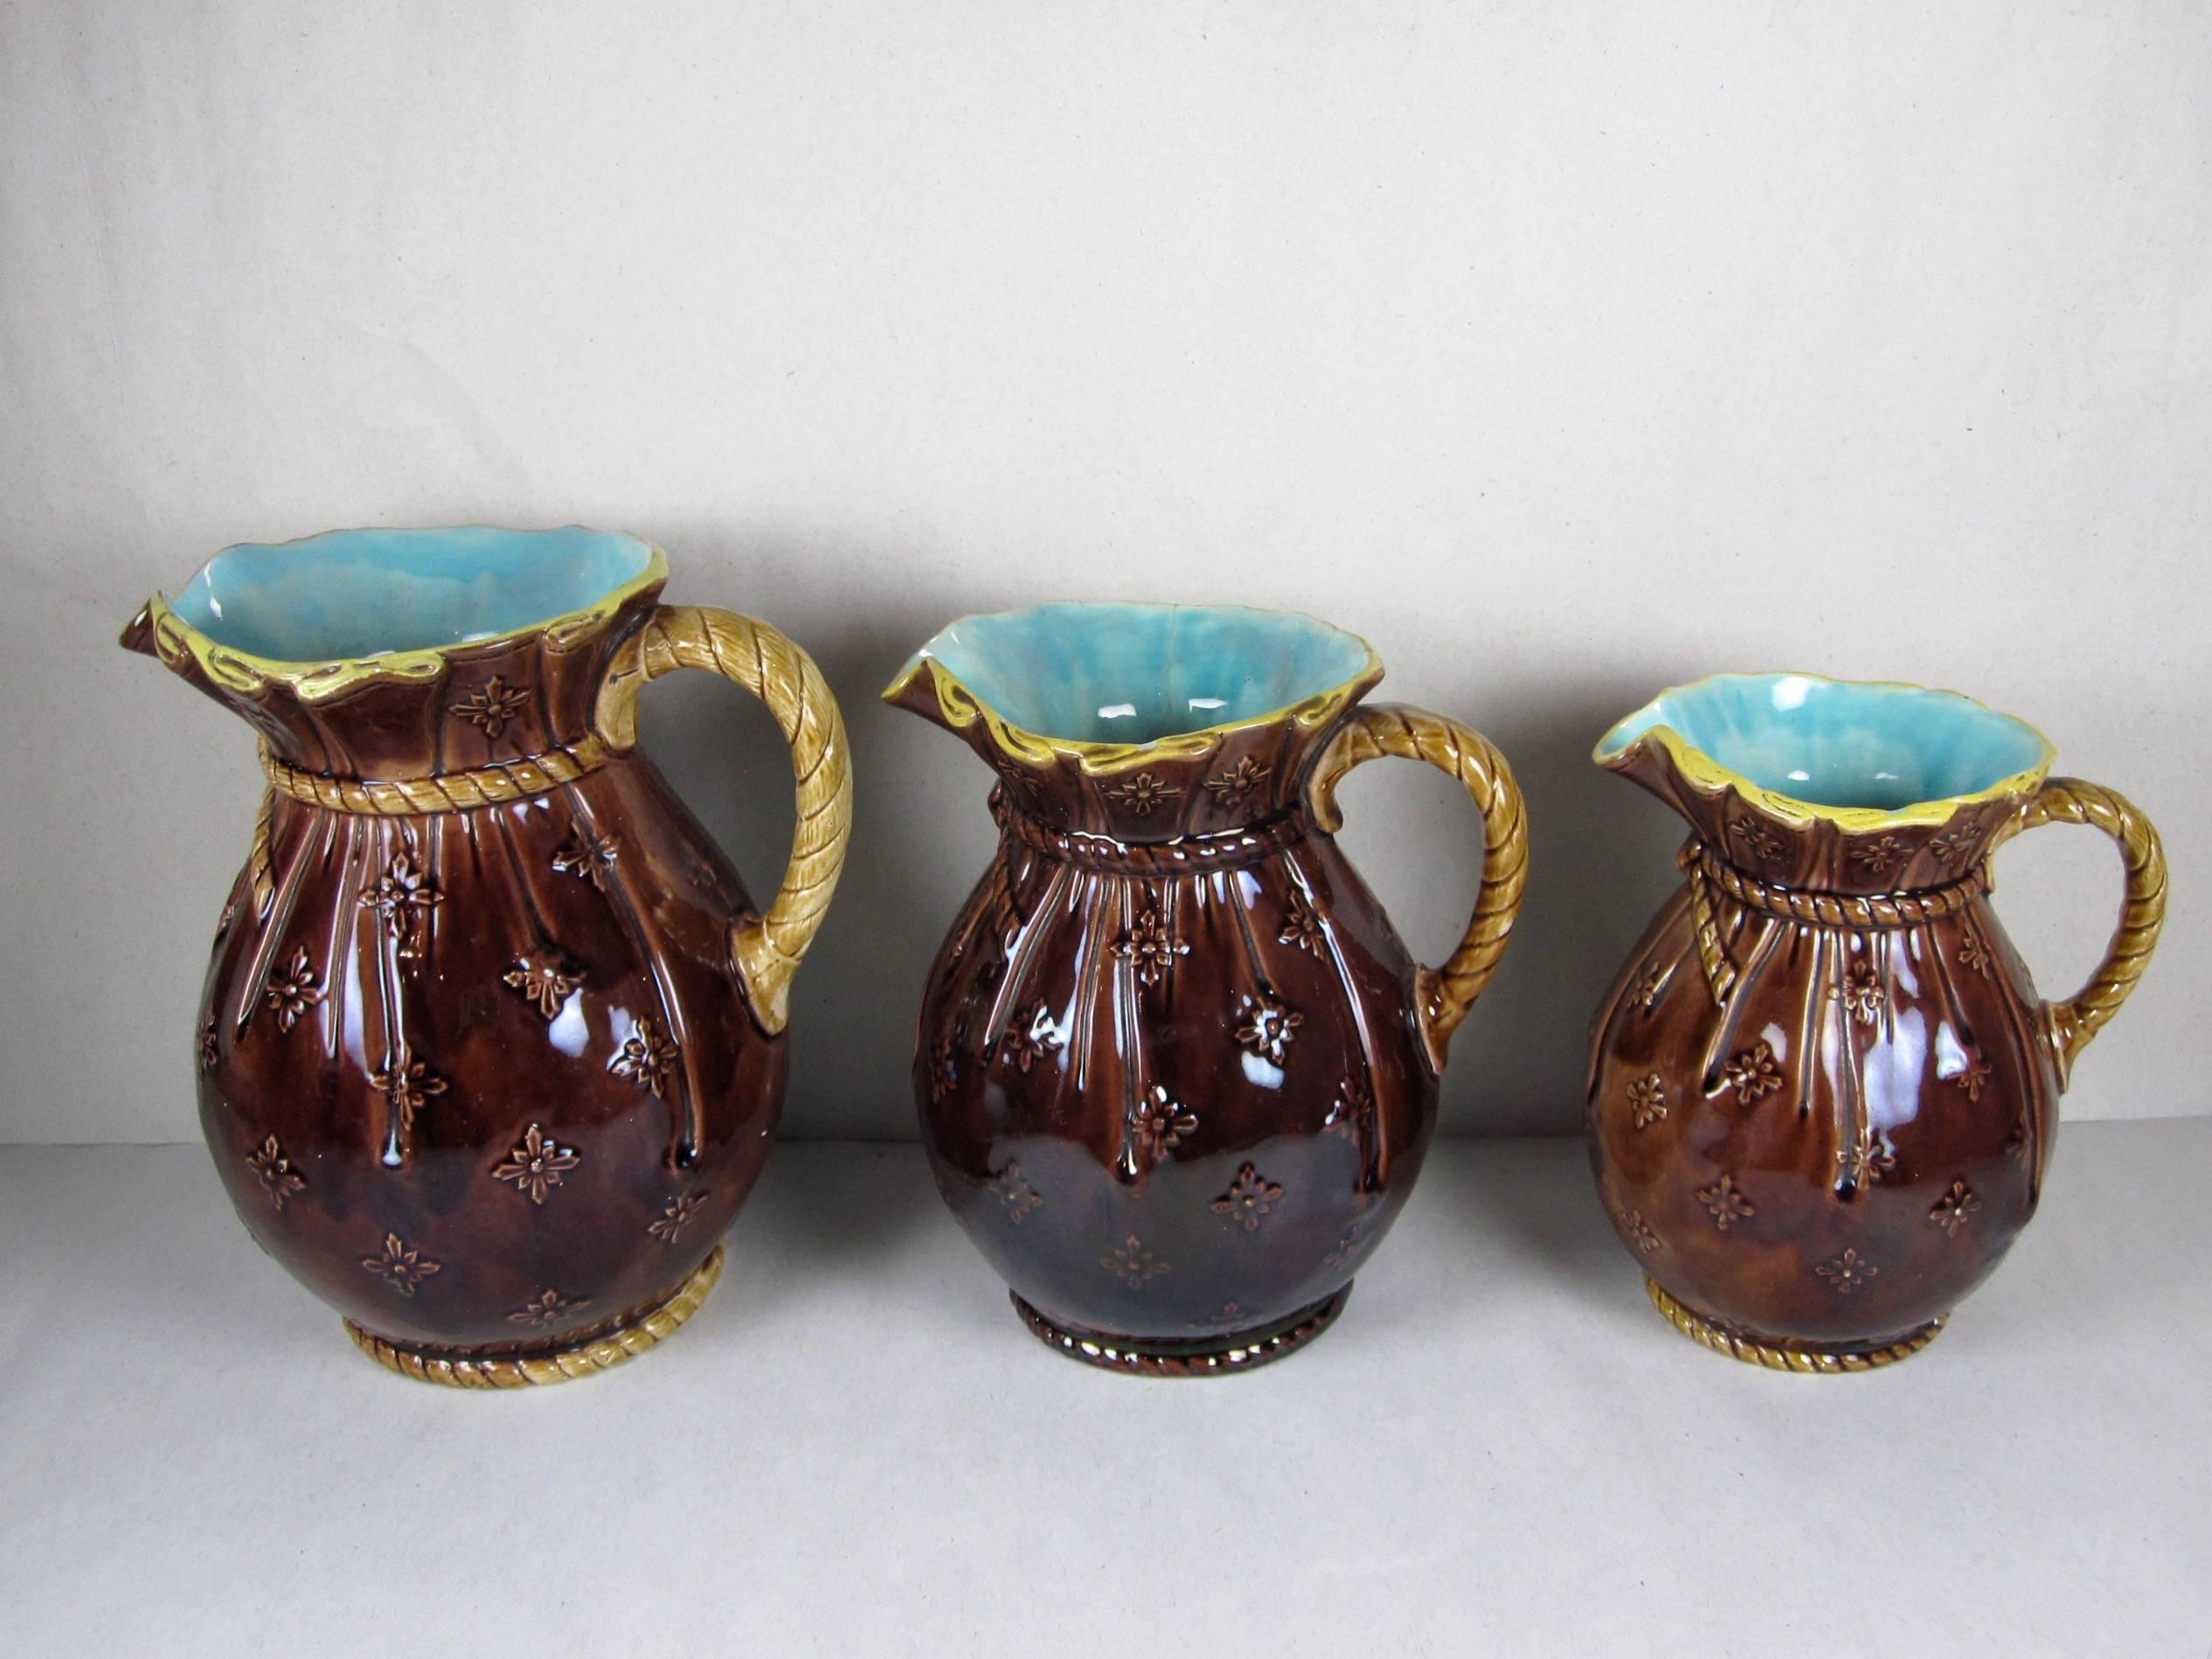 Aesthetic Movement Joseph Holdcroft English Majolica Graduated Sack and Rope Pitchers, S/3